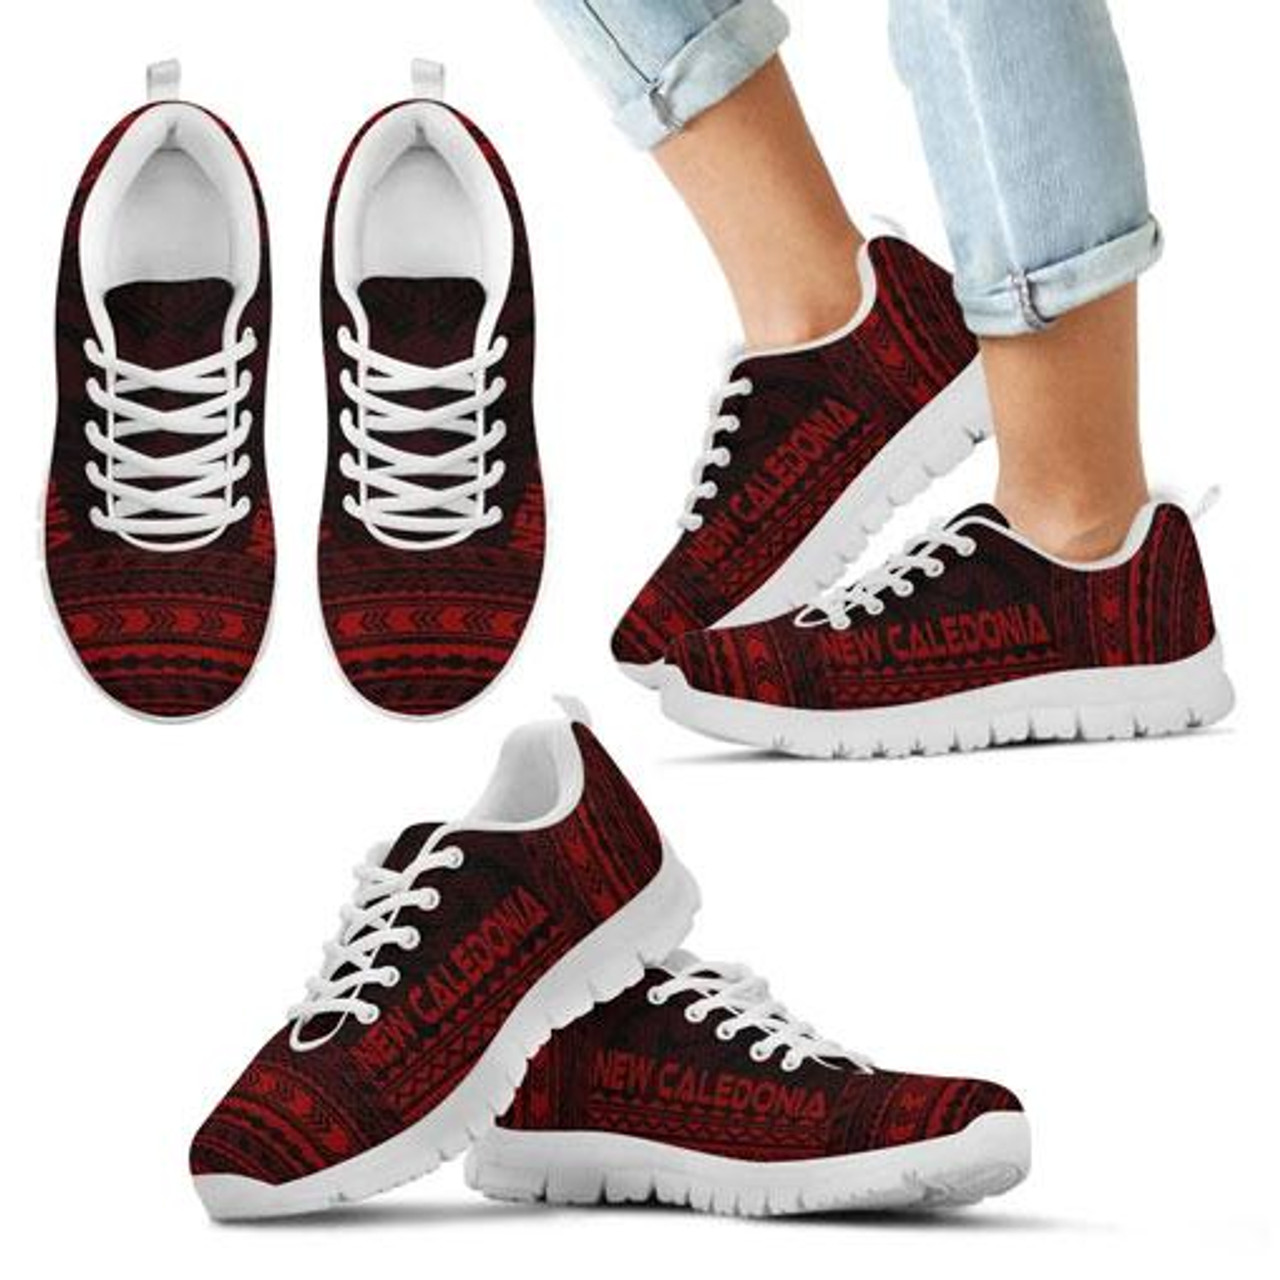 New Caledonia Sneakers - New Caledonia Polynesian Chief Tattoo Deep Red Version 5